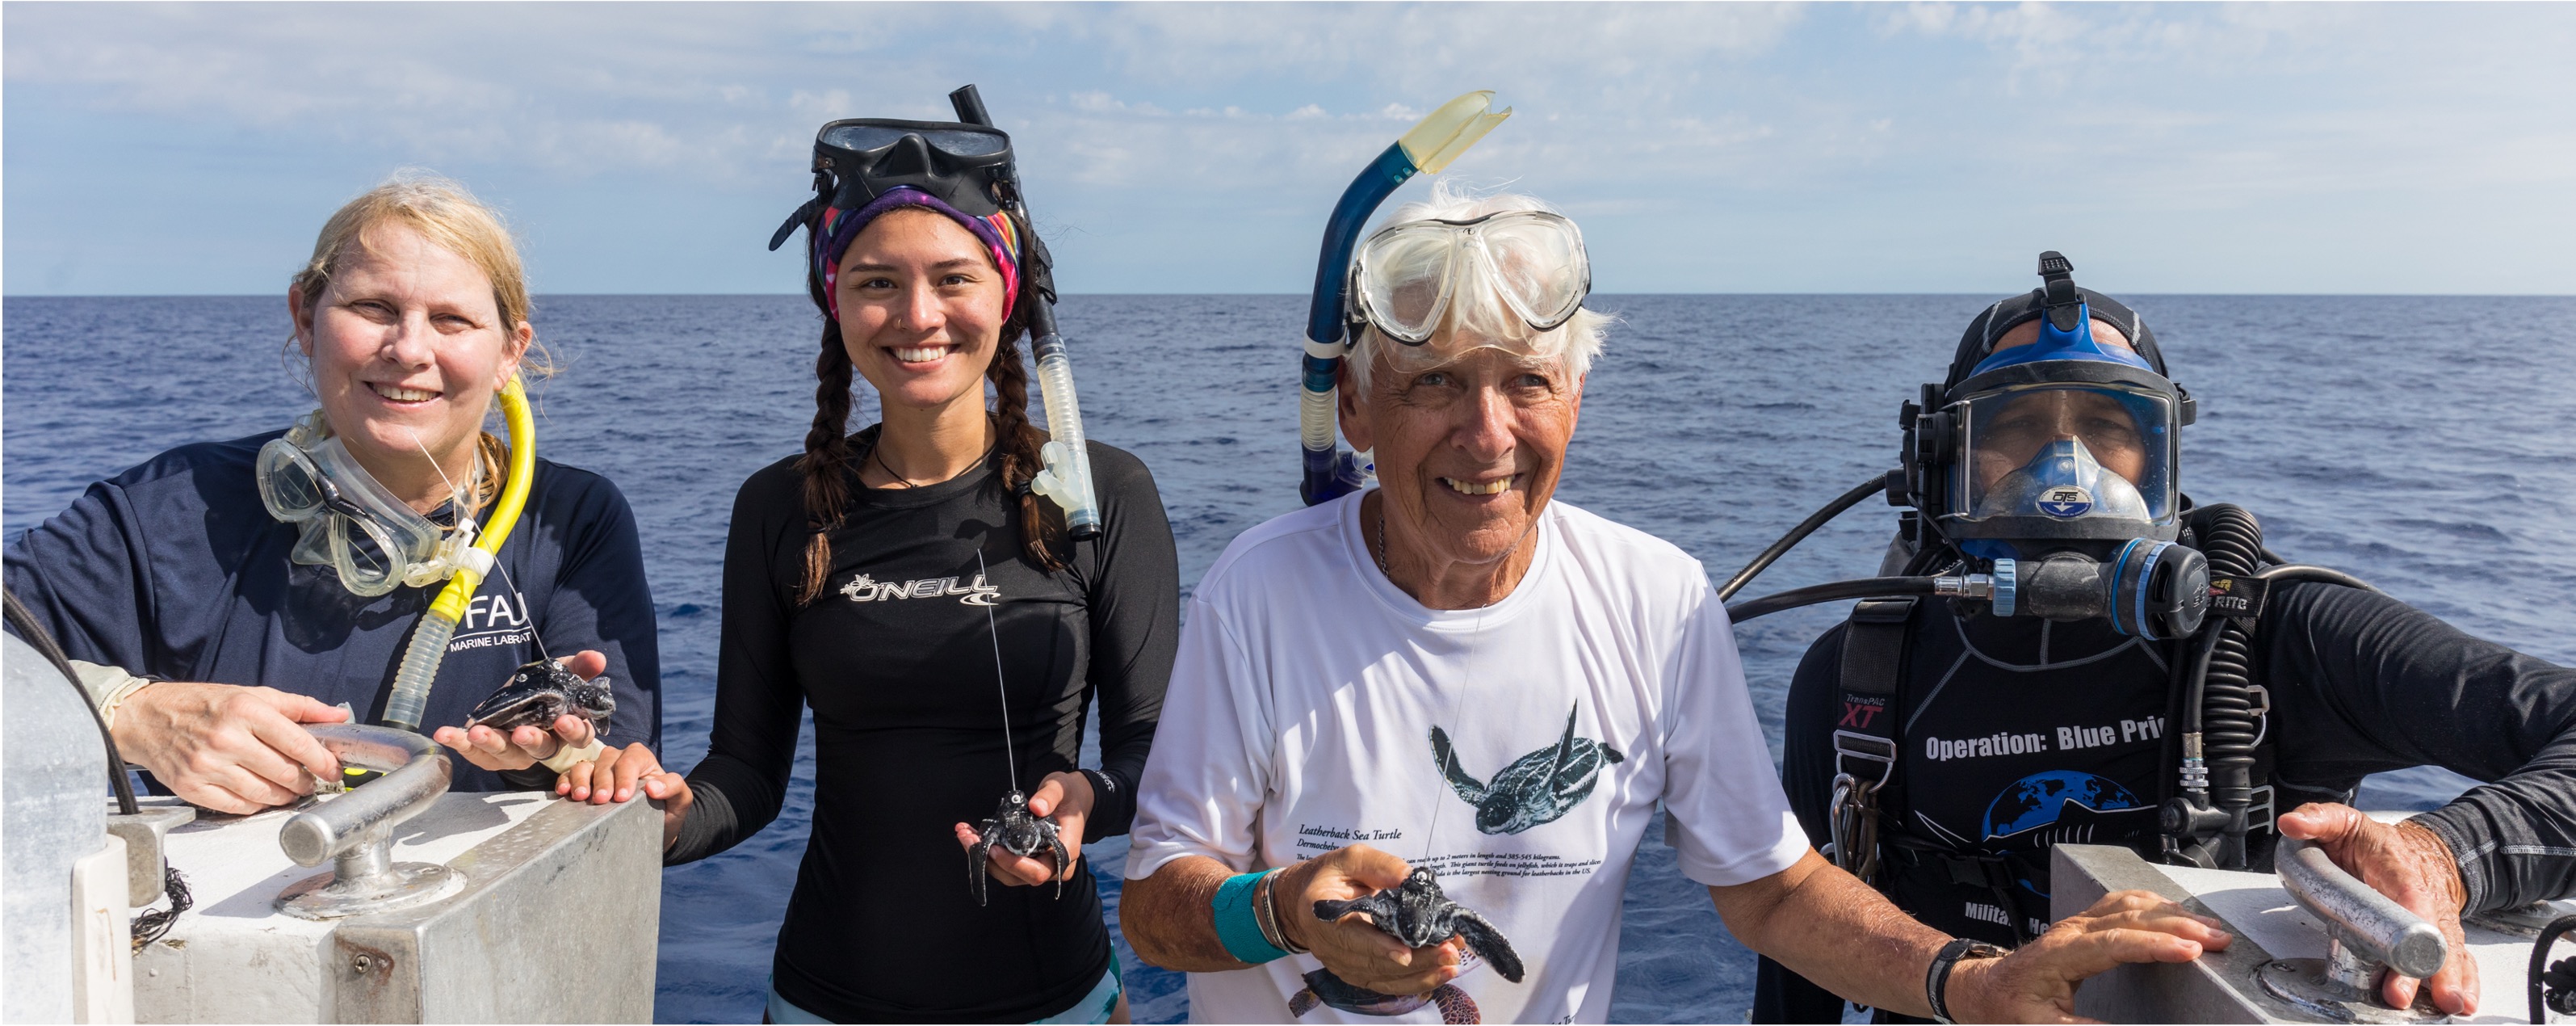 4 members of the turtle transport team hold baby turtles toward the camera